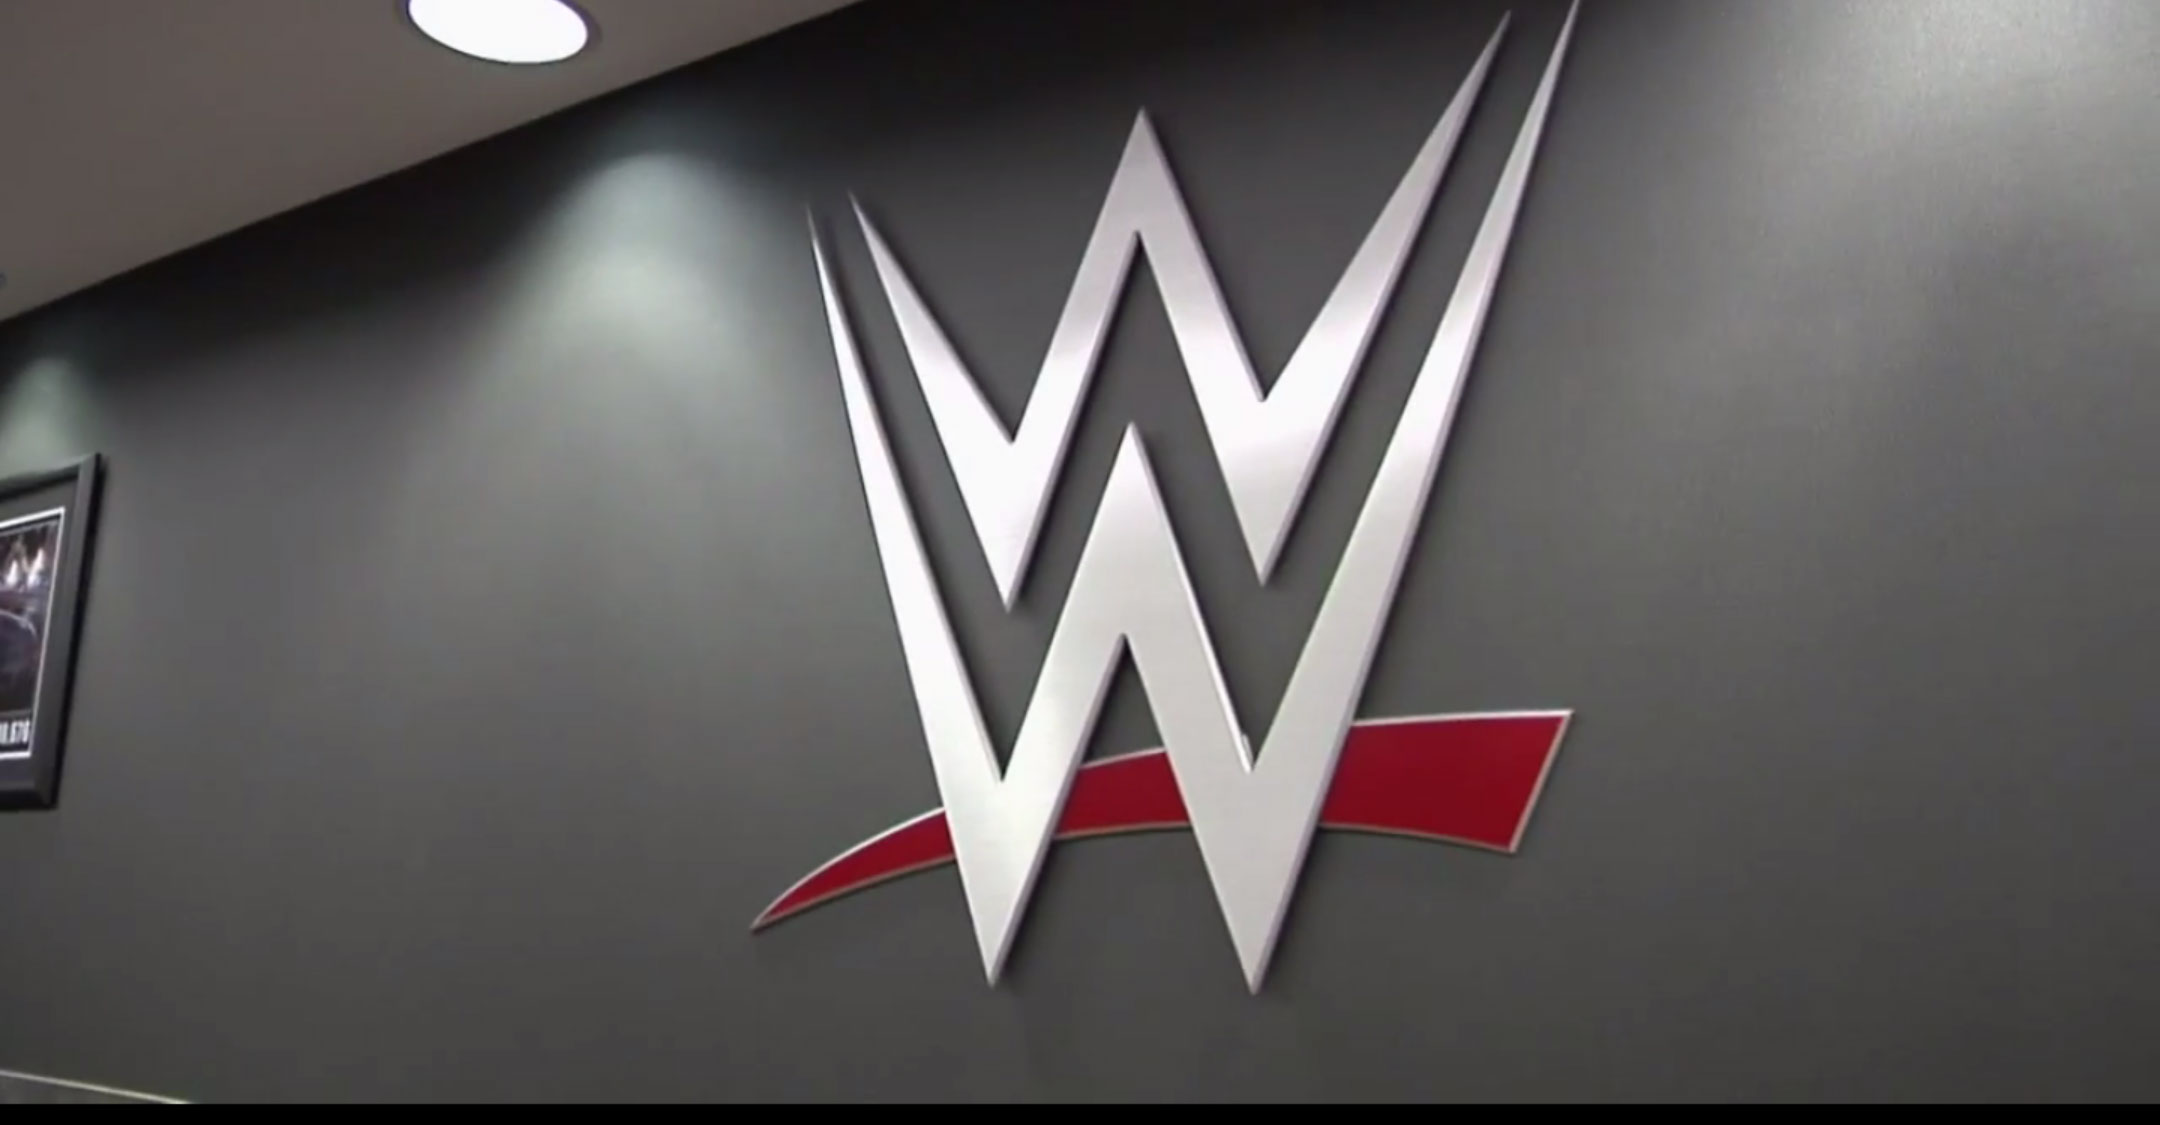 WWE Staff Expects Layoffs in September – News and Results Wrestling WWE Raw, Smackdown, NXT, AEW – PRWrestling